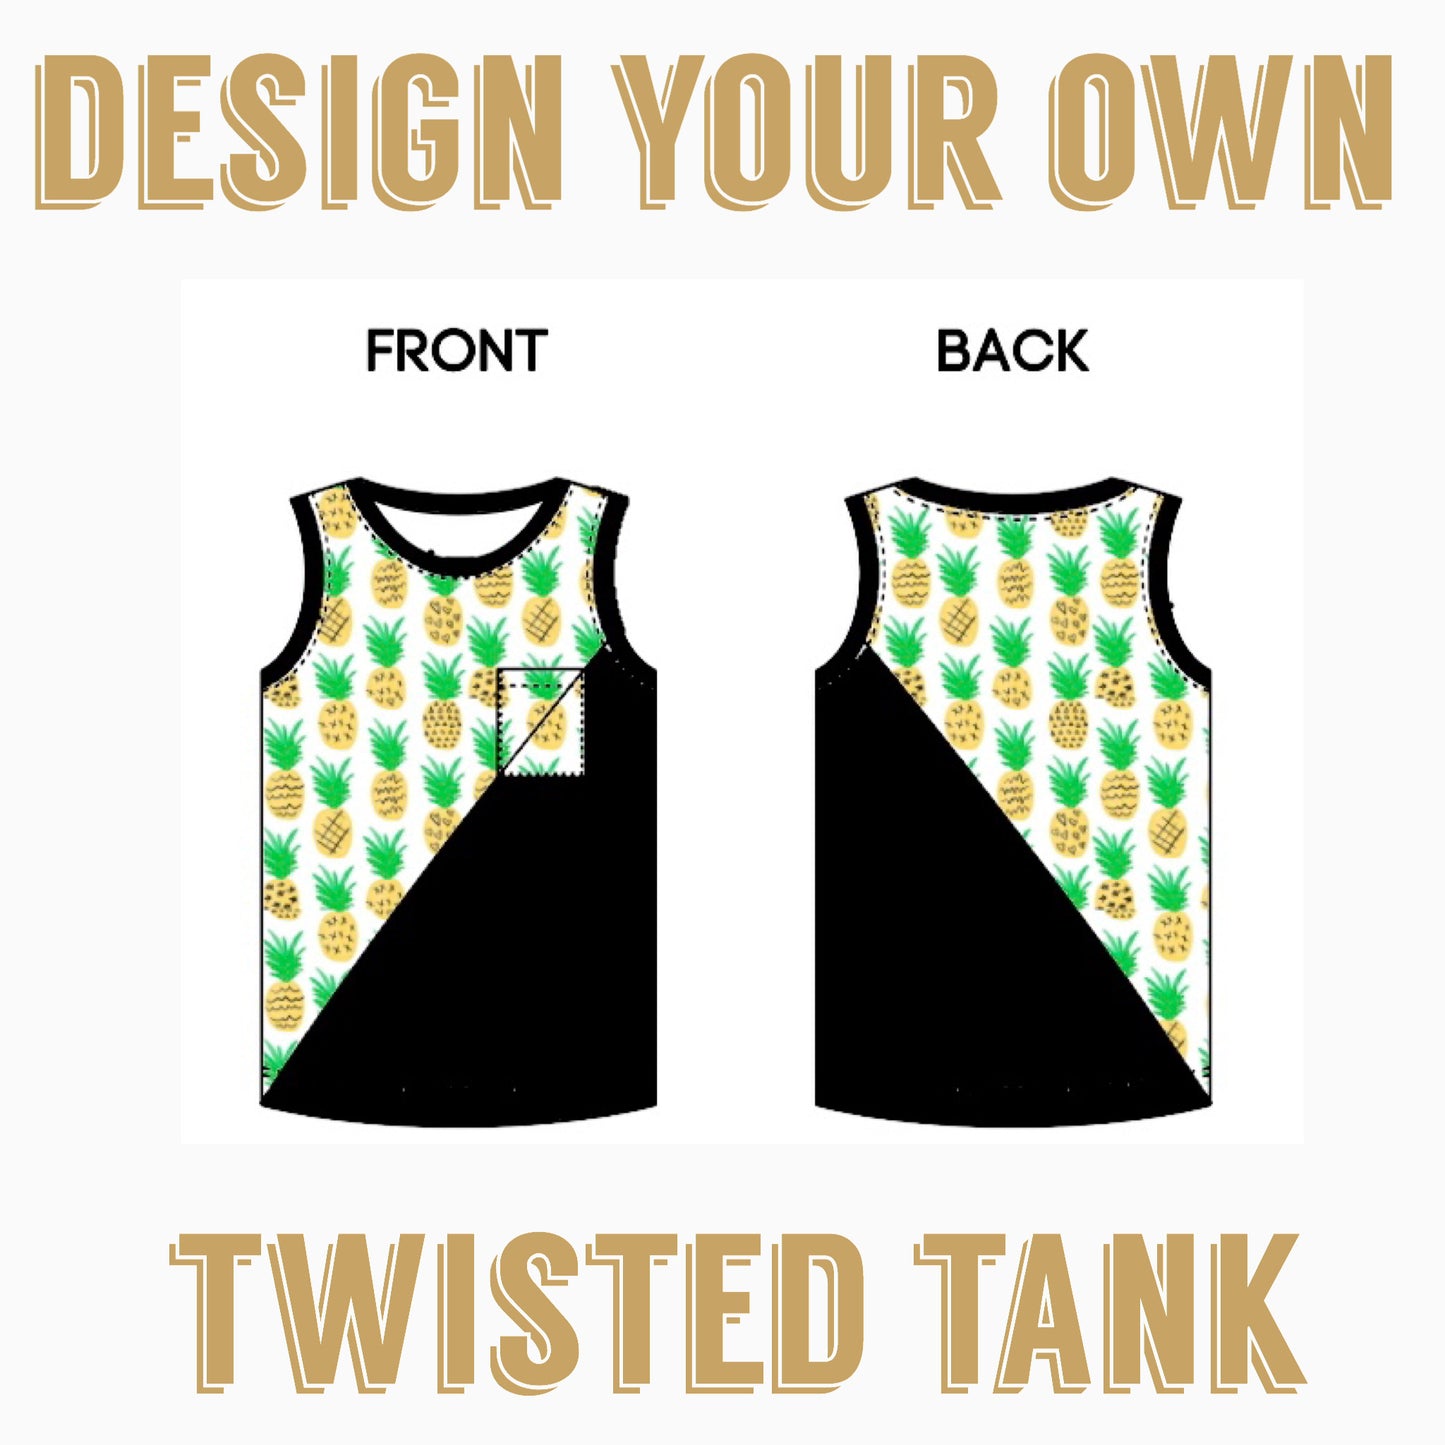 Design Your Own| Twisted Tank